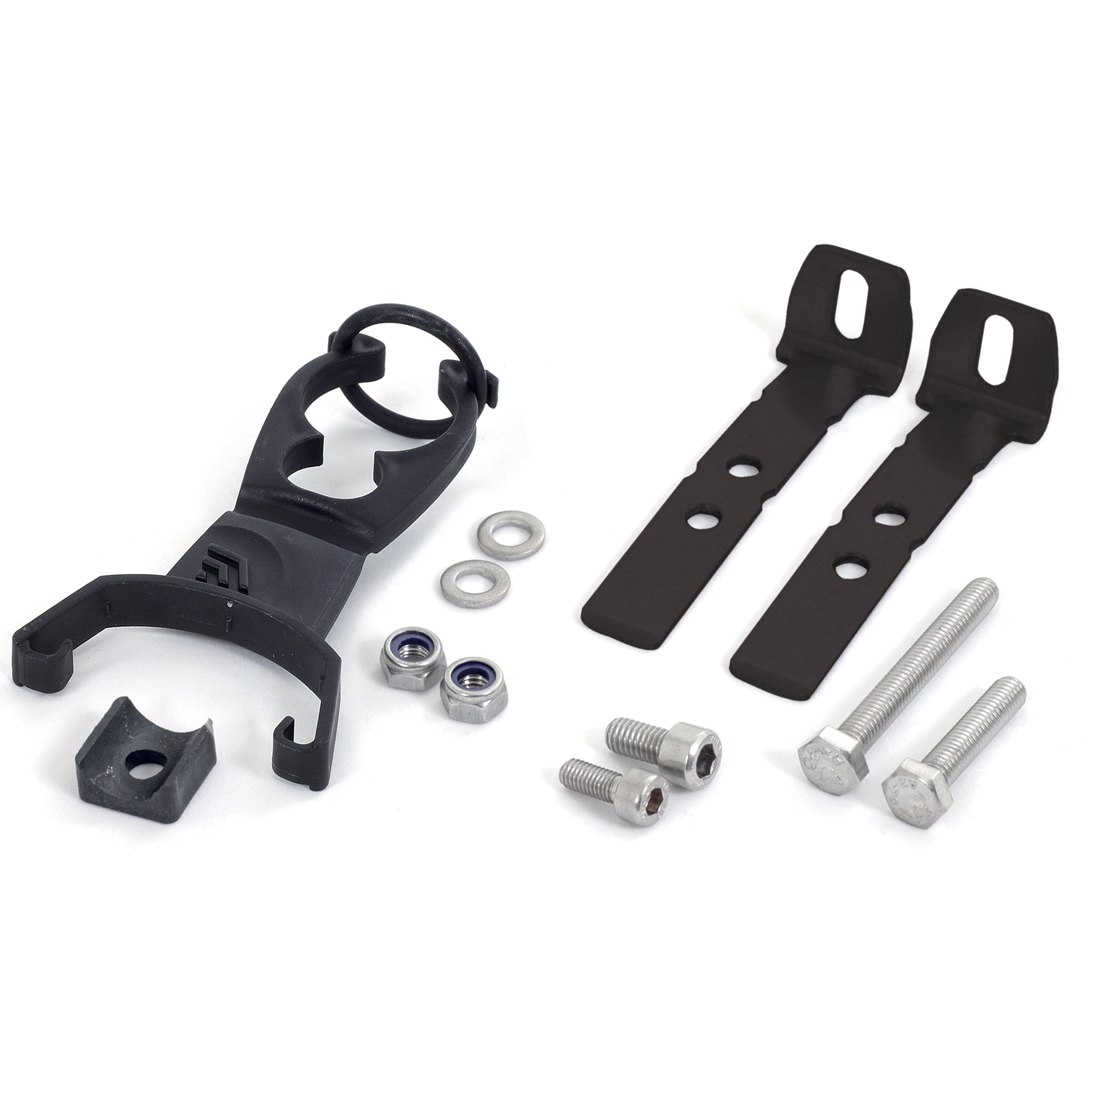 Picture of Hebie Mounting Set for Viper 742/761